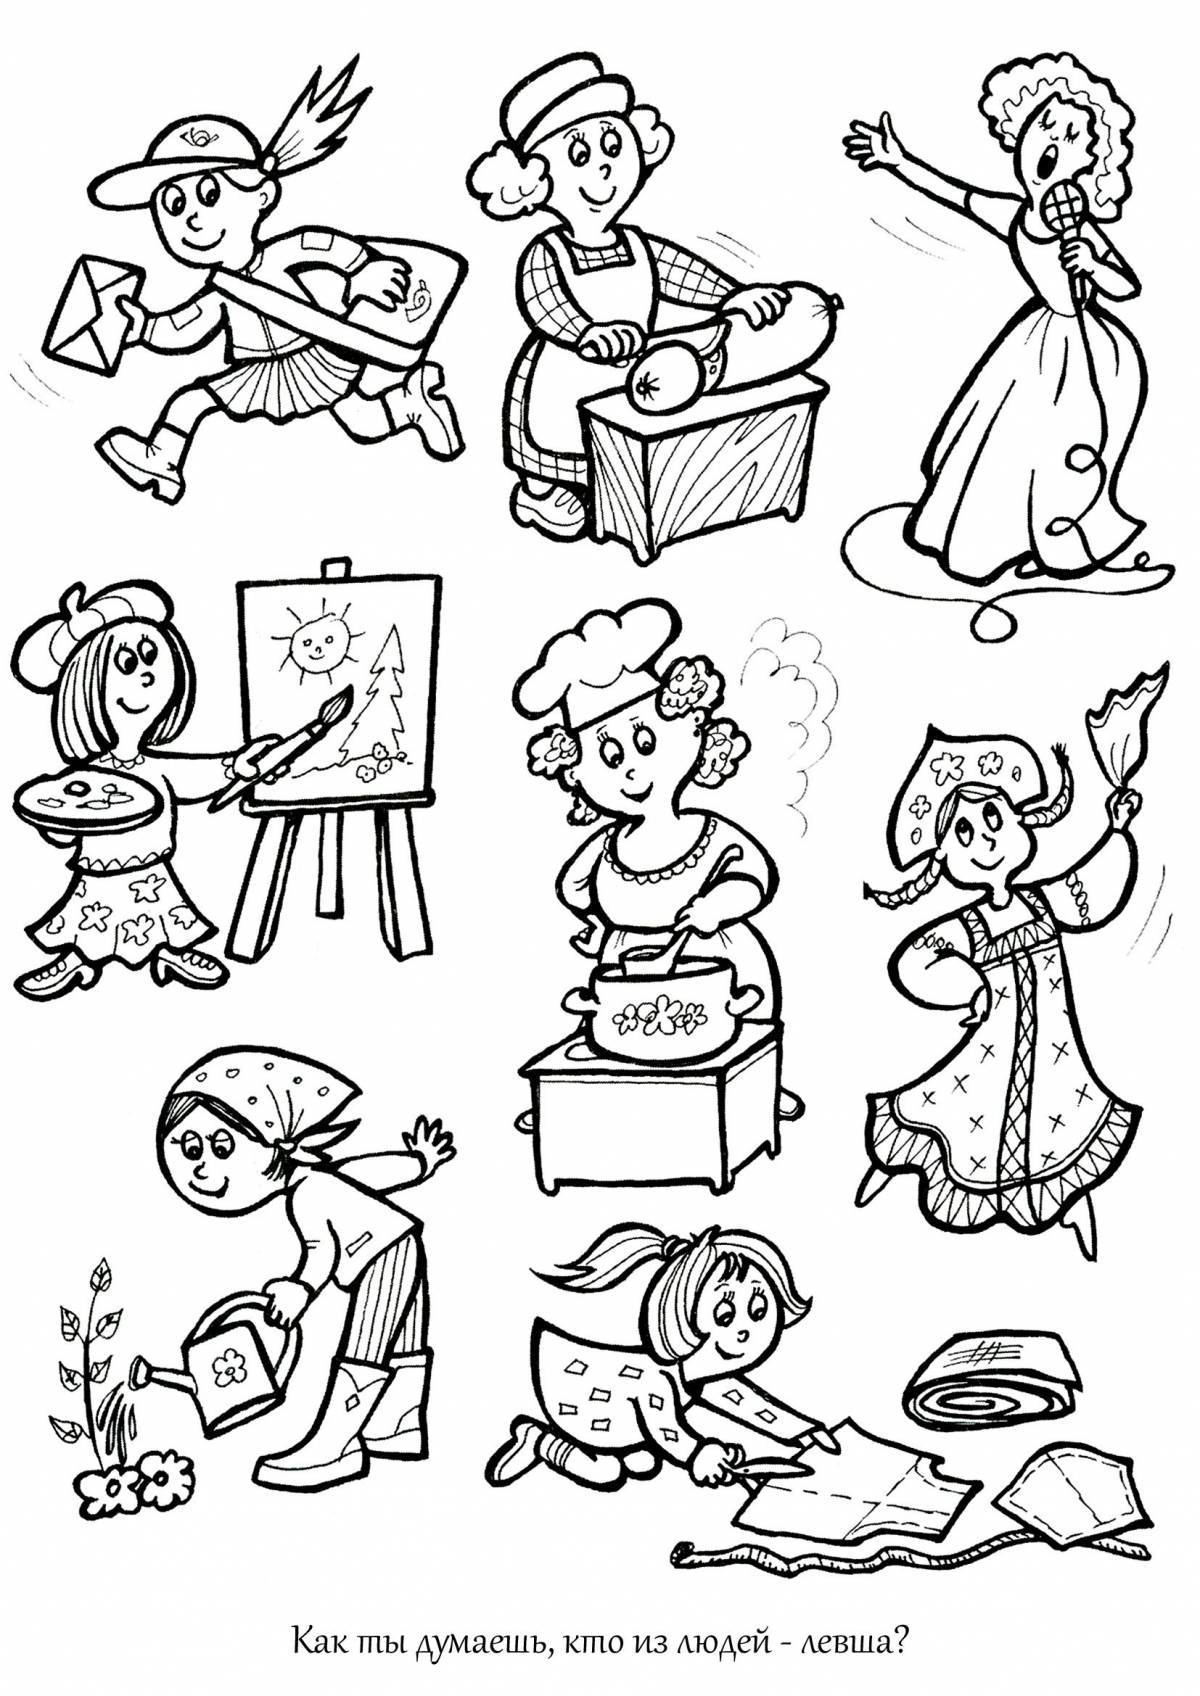 Coloring professions for children 4-5 years old